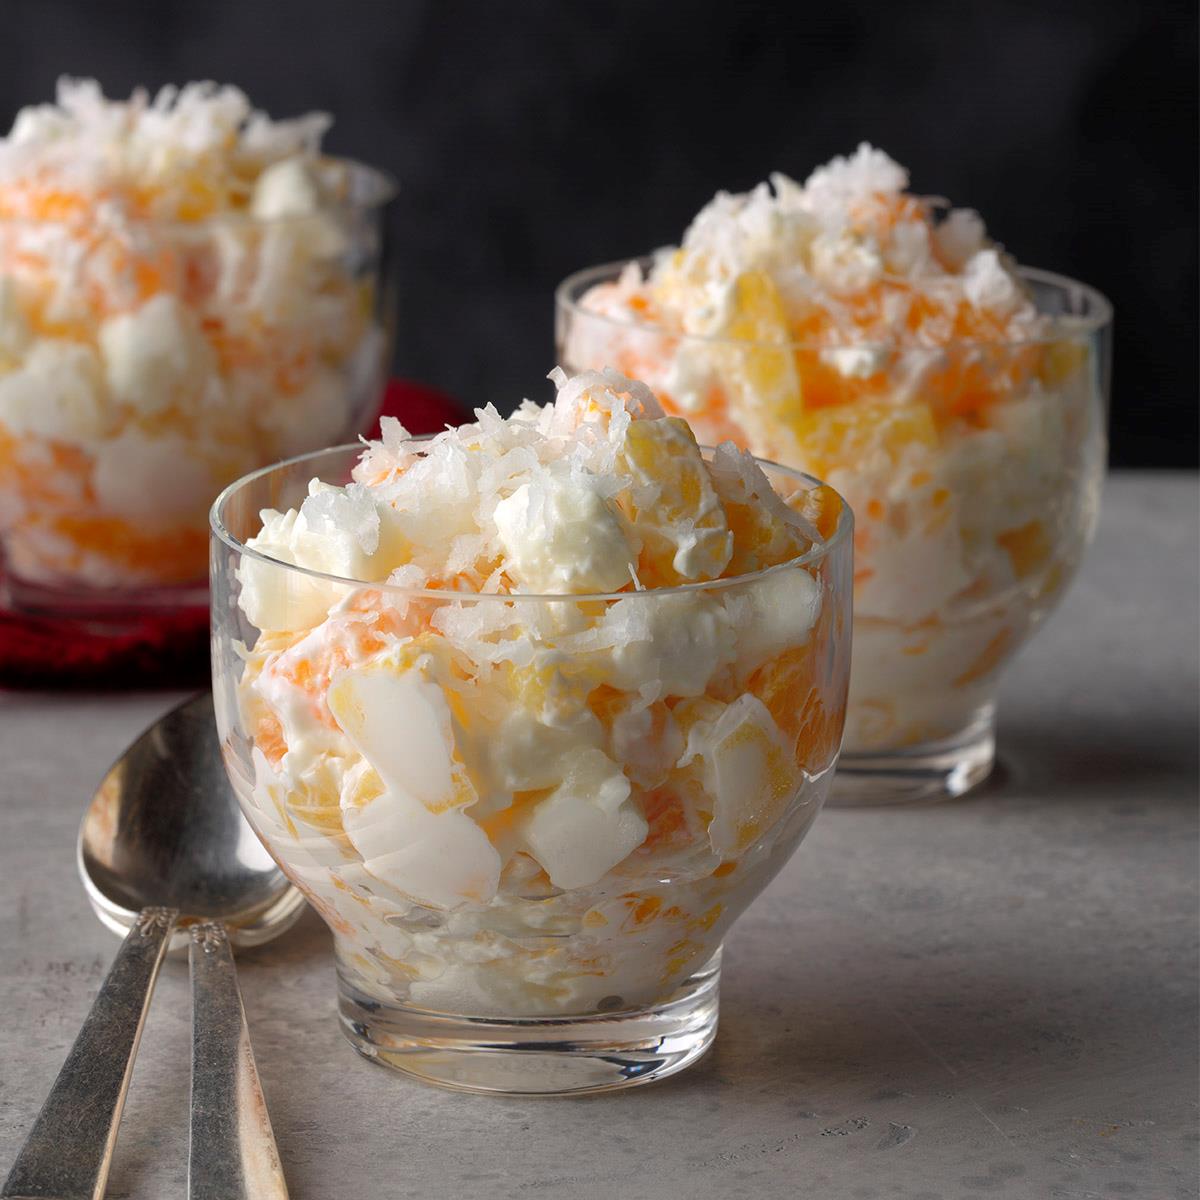 An Ode to Ambrosia, the Salad You Make With Cool Whip